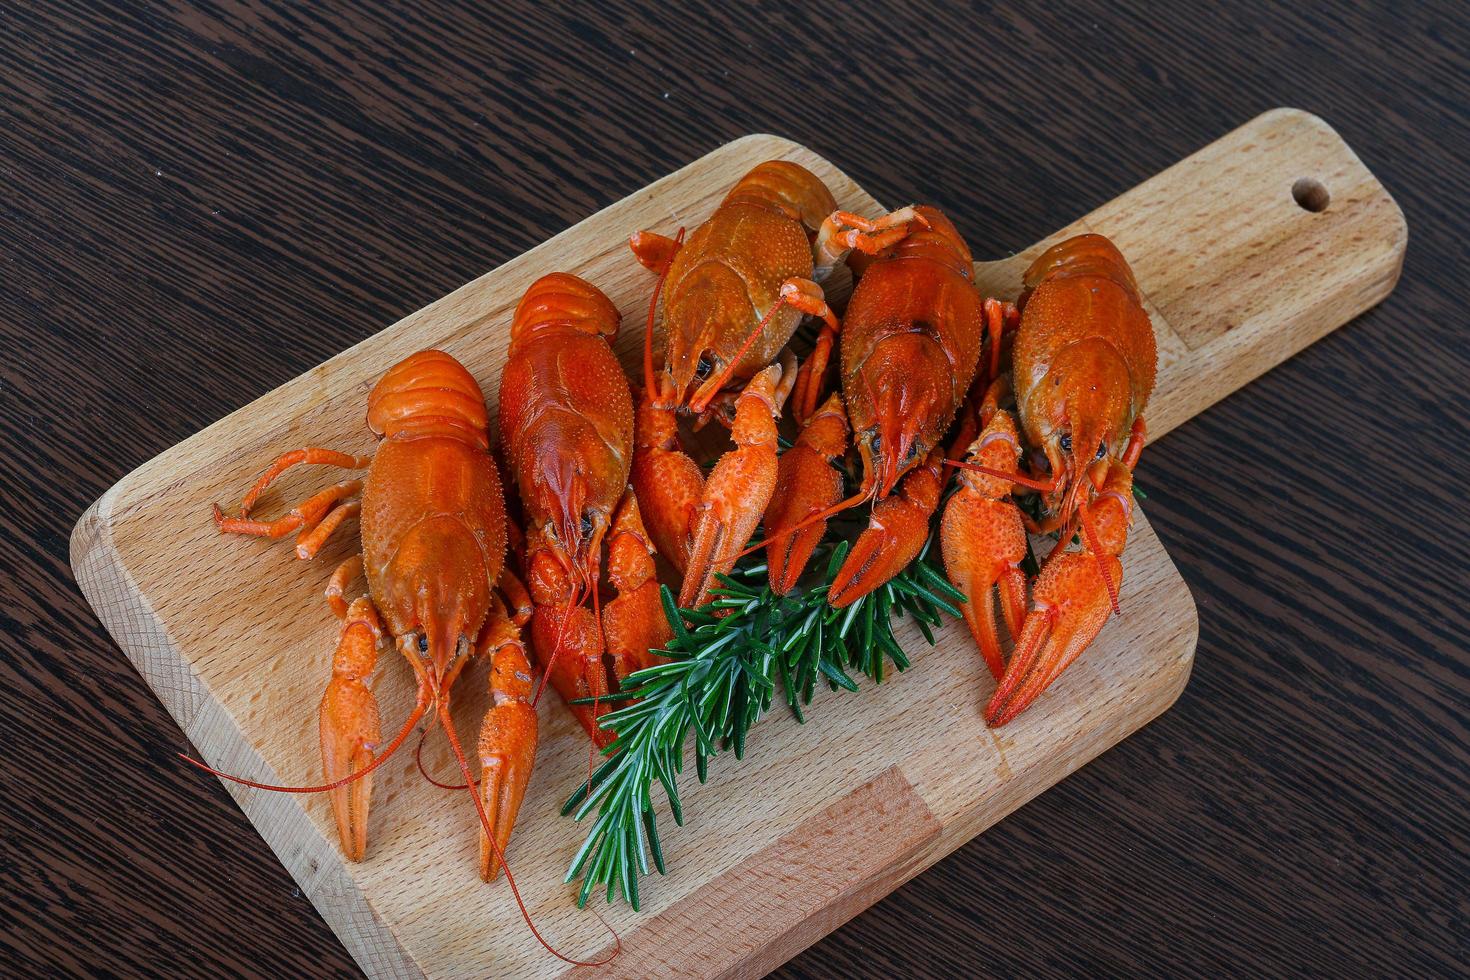 Crayfish on wooden board and wooden background photo